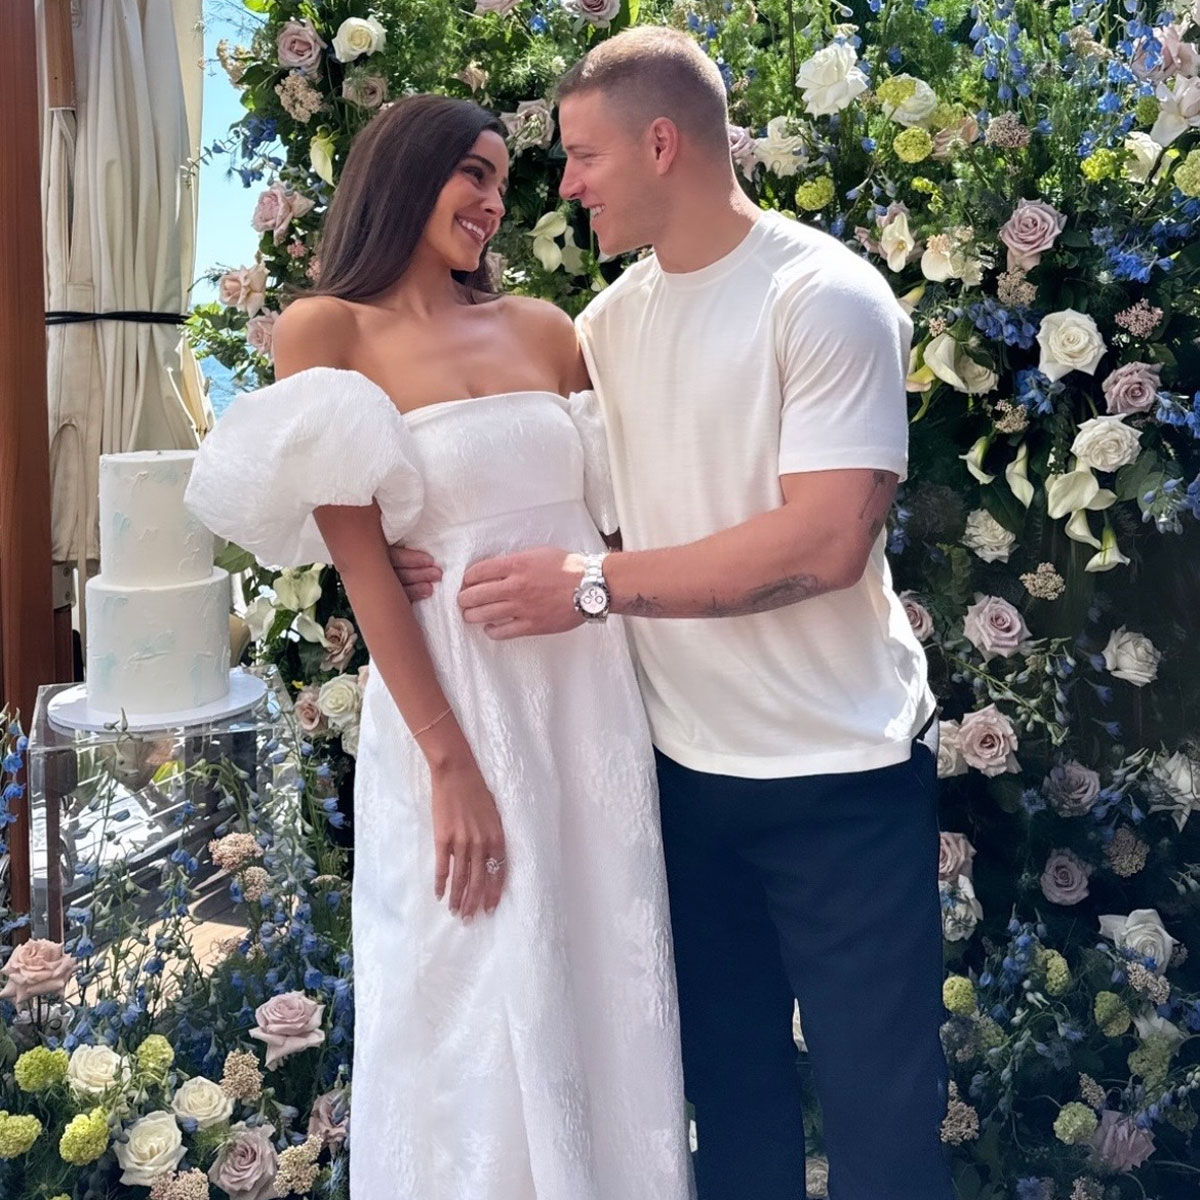 Why Olivia Culpo Didn’t Want Her Wedding Dress to “Exude Sex”